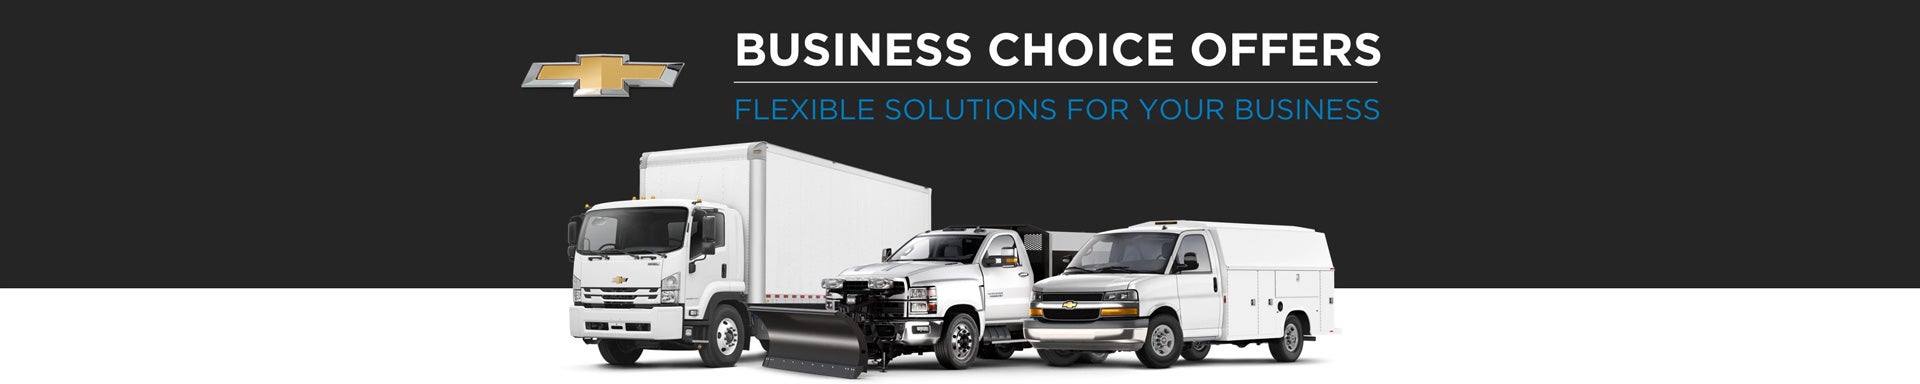 Chevrolet Business Choice Offers - Flexible Solutions for your Business - Chevrolet of New Bern in NEW BERN NC